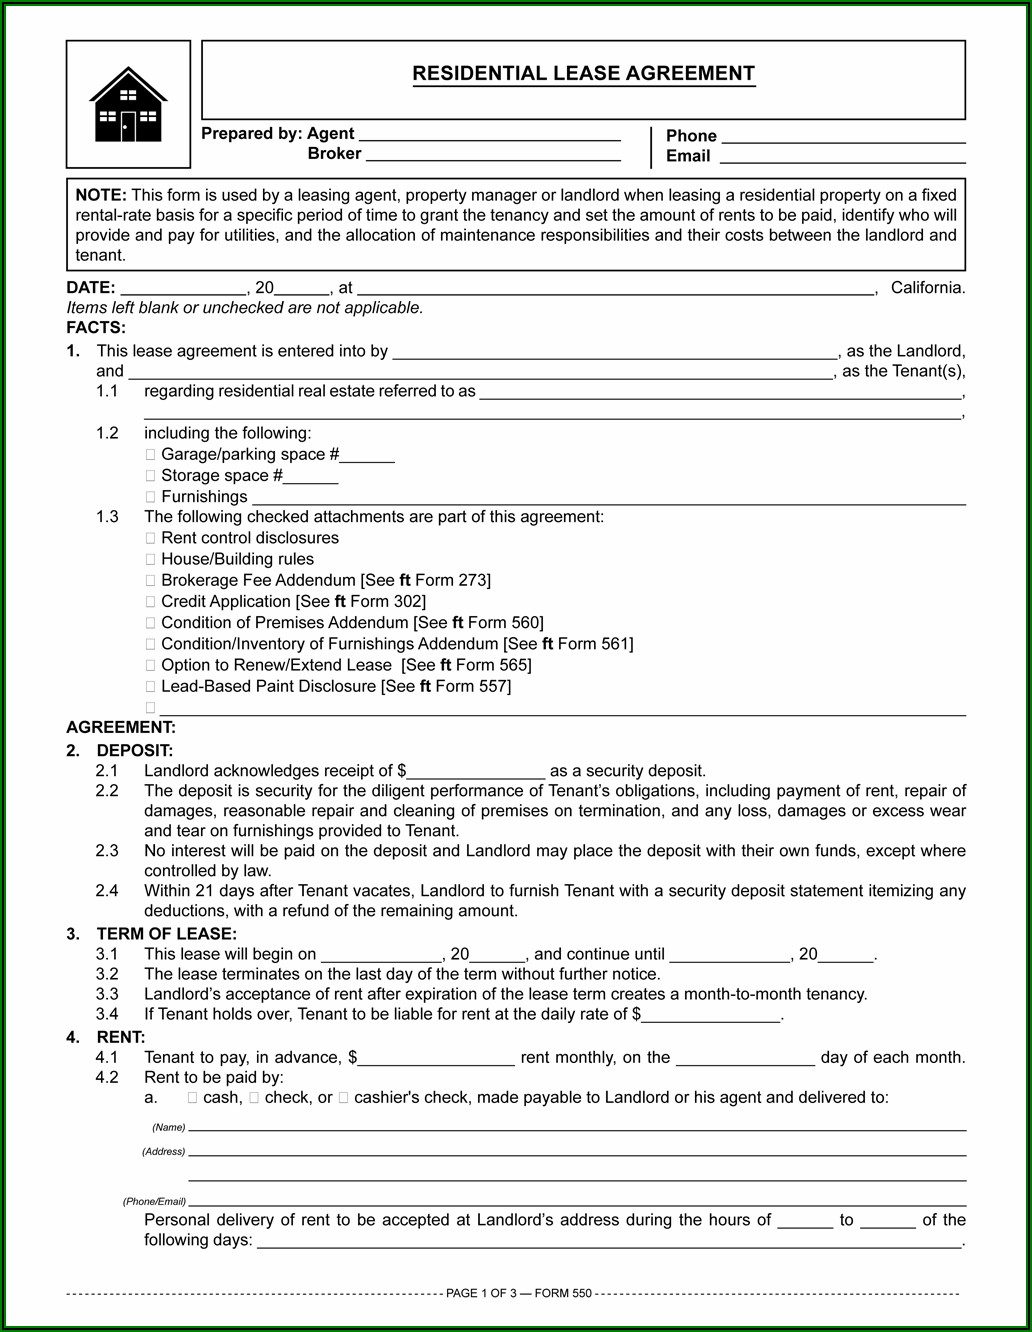 Residential Lease Agreement Form